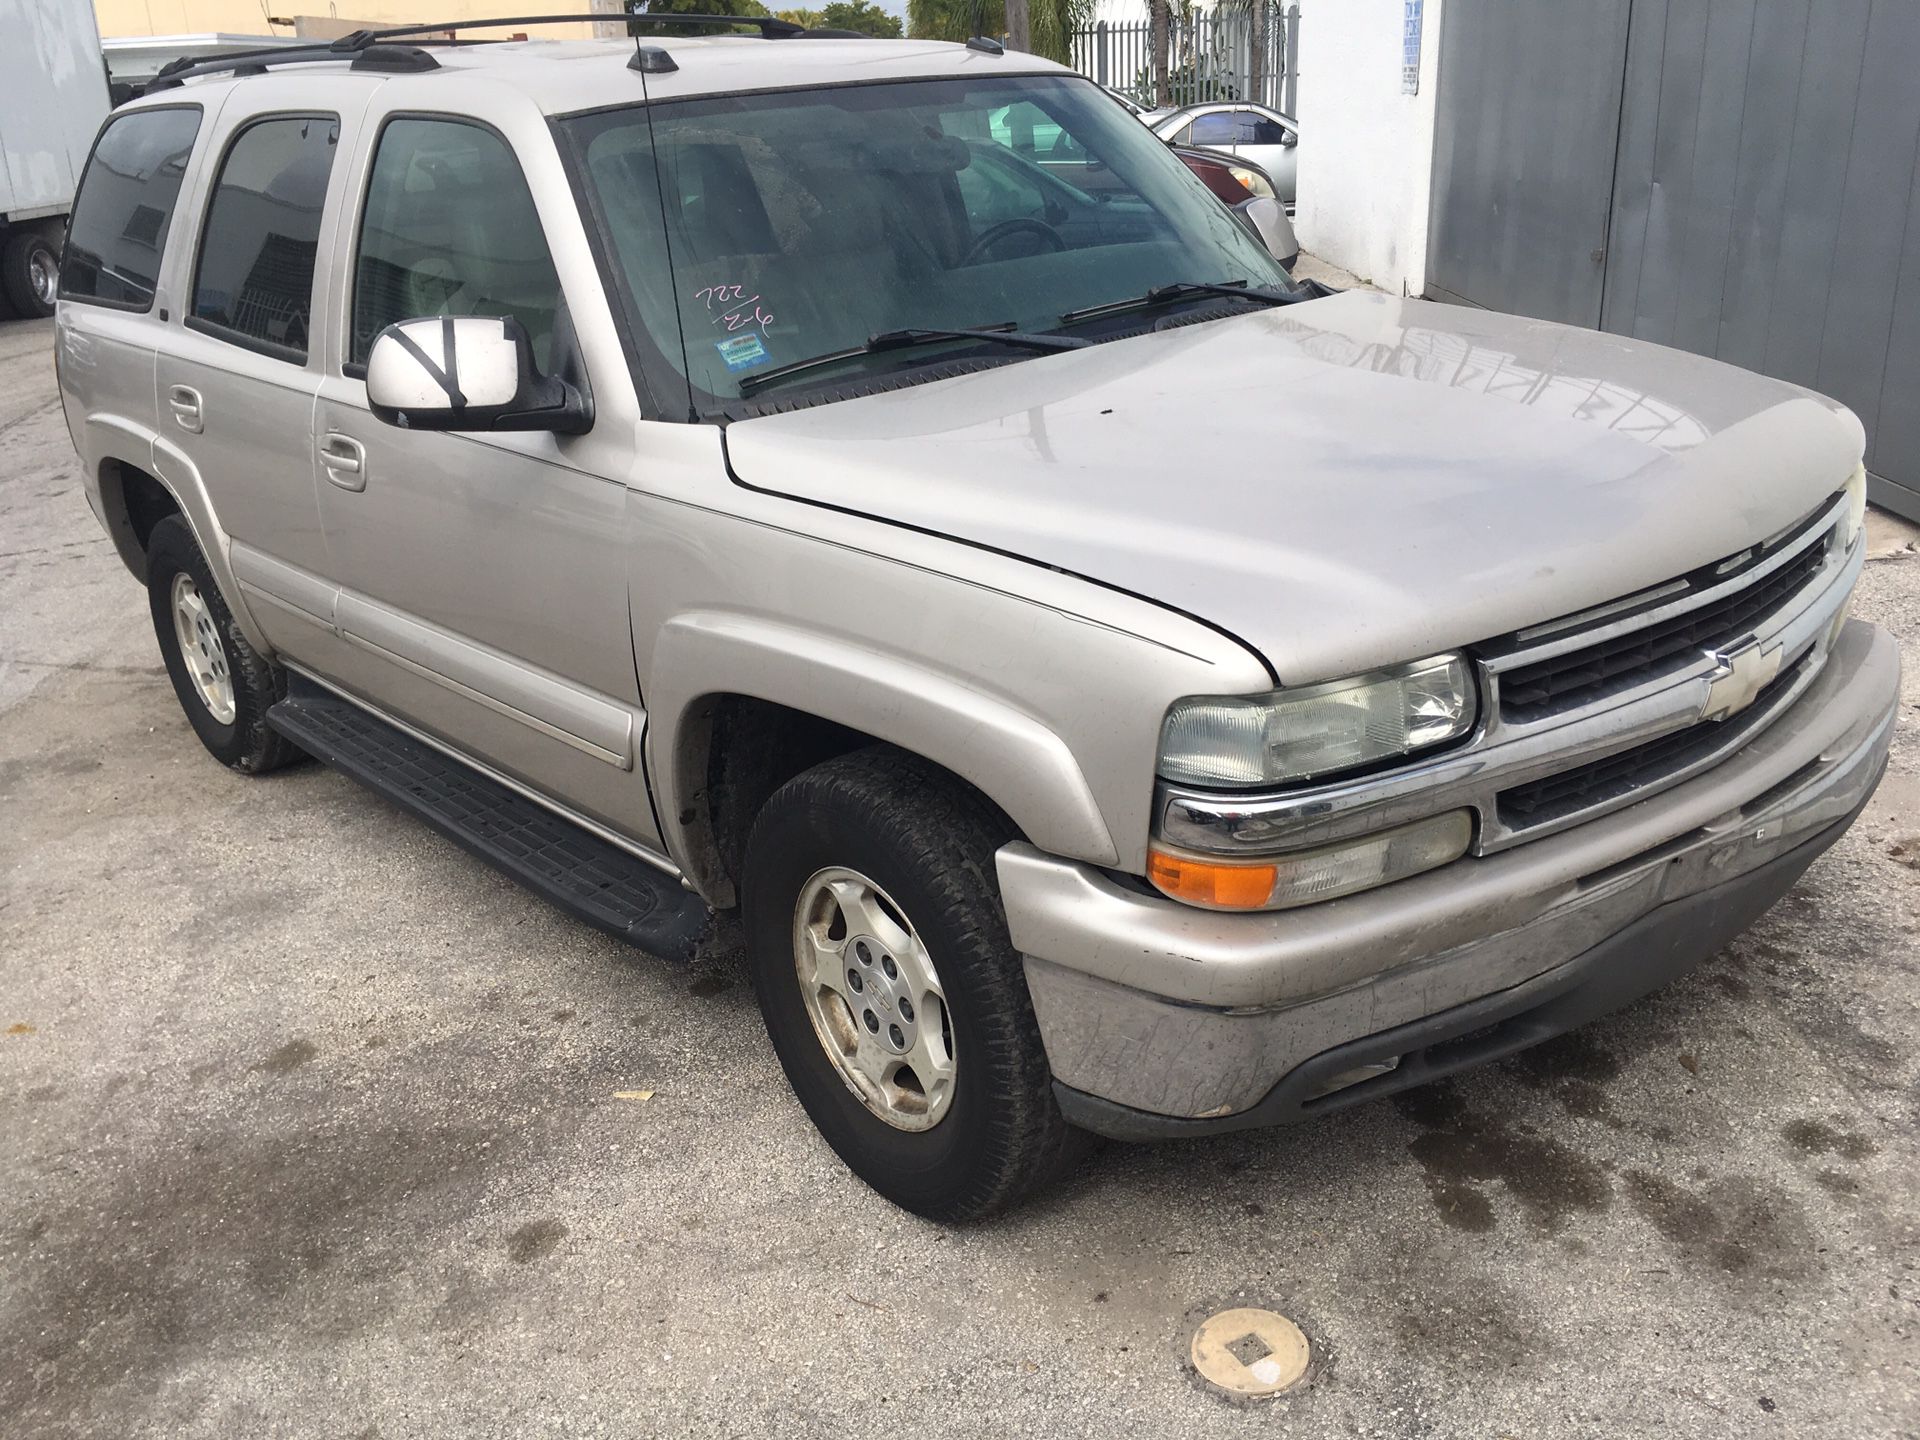 Parting out 2006 Chevy Tahoe 2wd , OEM GM parts GMC Yukon, avalanche, Suburban, denali, etc.